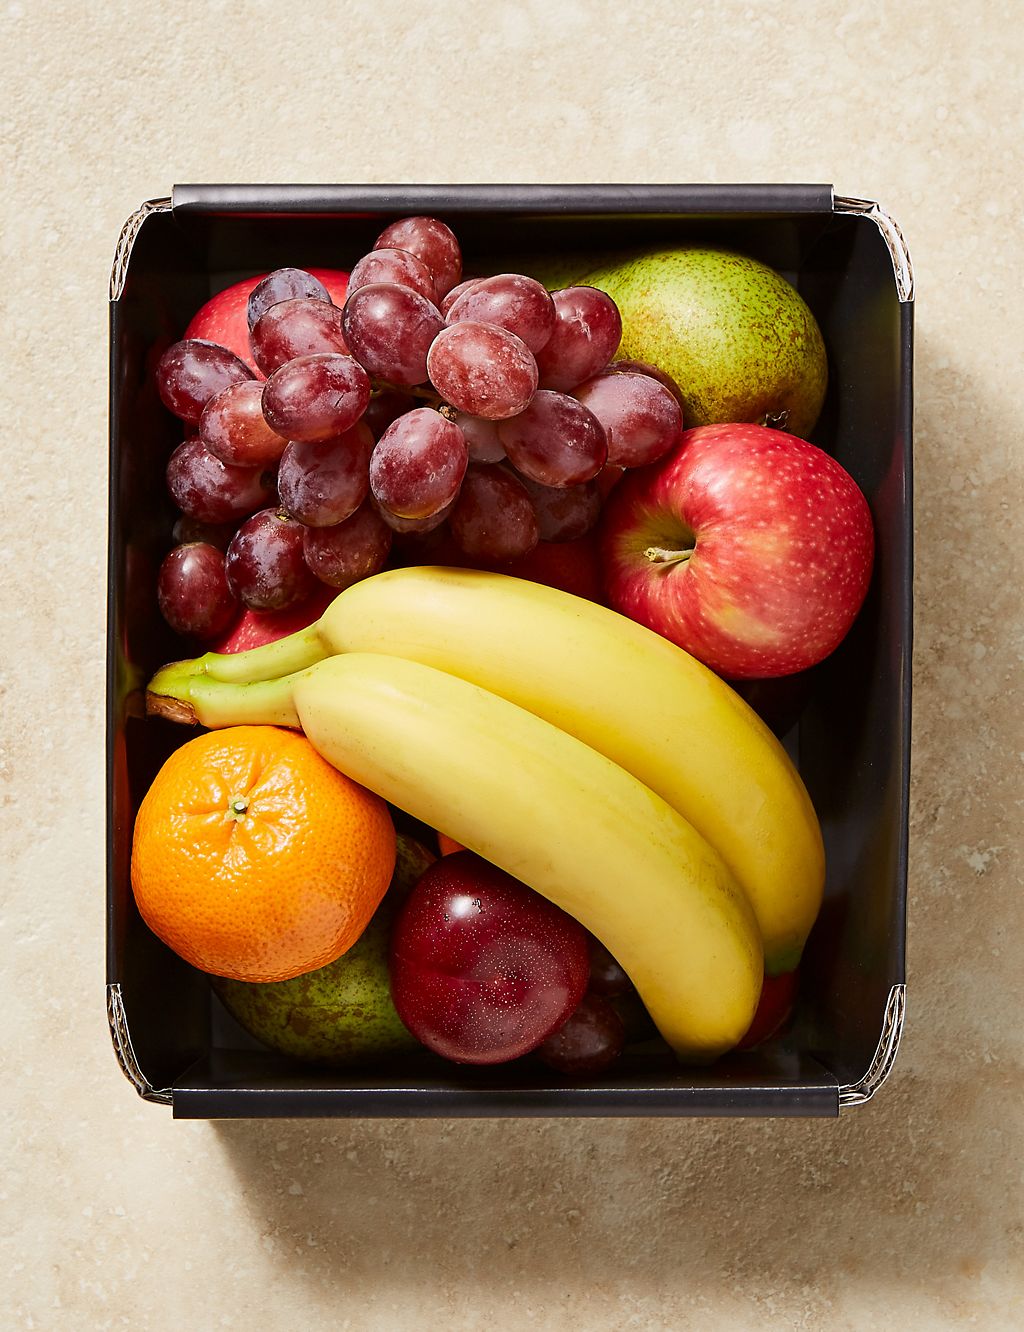 Medium Fresh Fruit Selection (Serves 12) - (Last Collection Date 30th September 2020) 1 of 2